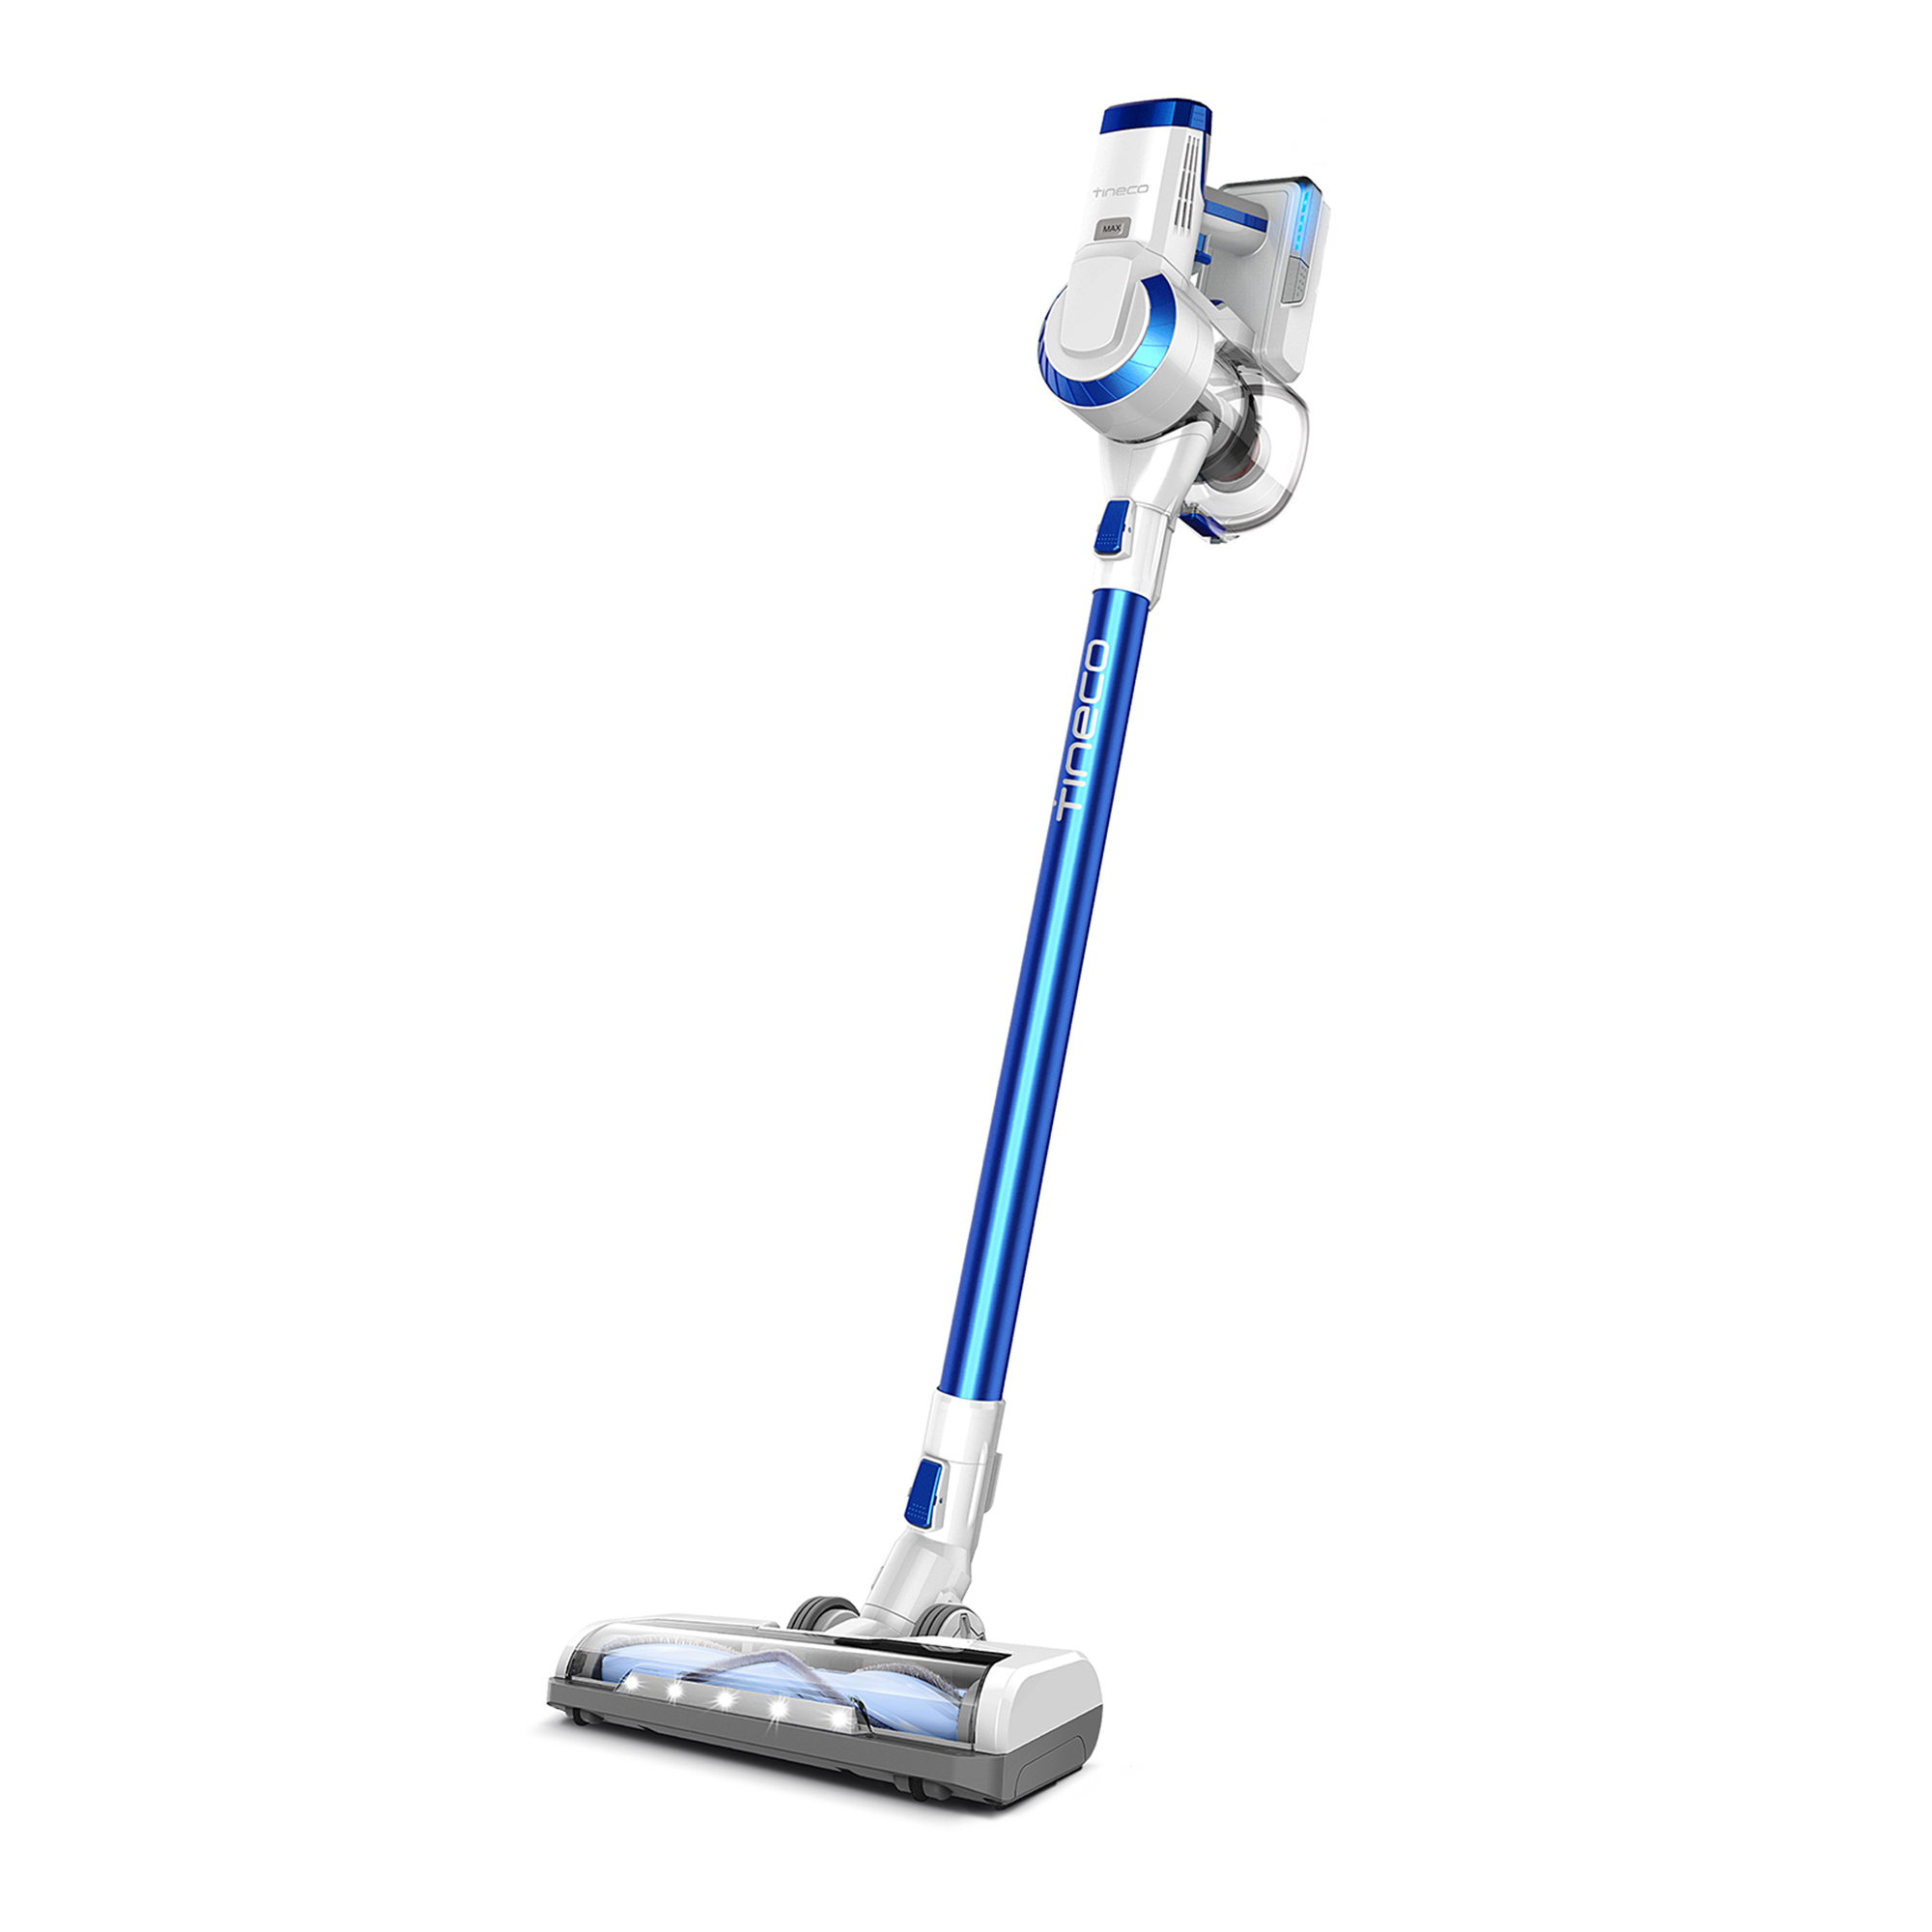 Tineco A10 Hero Lightweight Cordless Stick Vacuum Cleaner - image 1 of 6